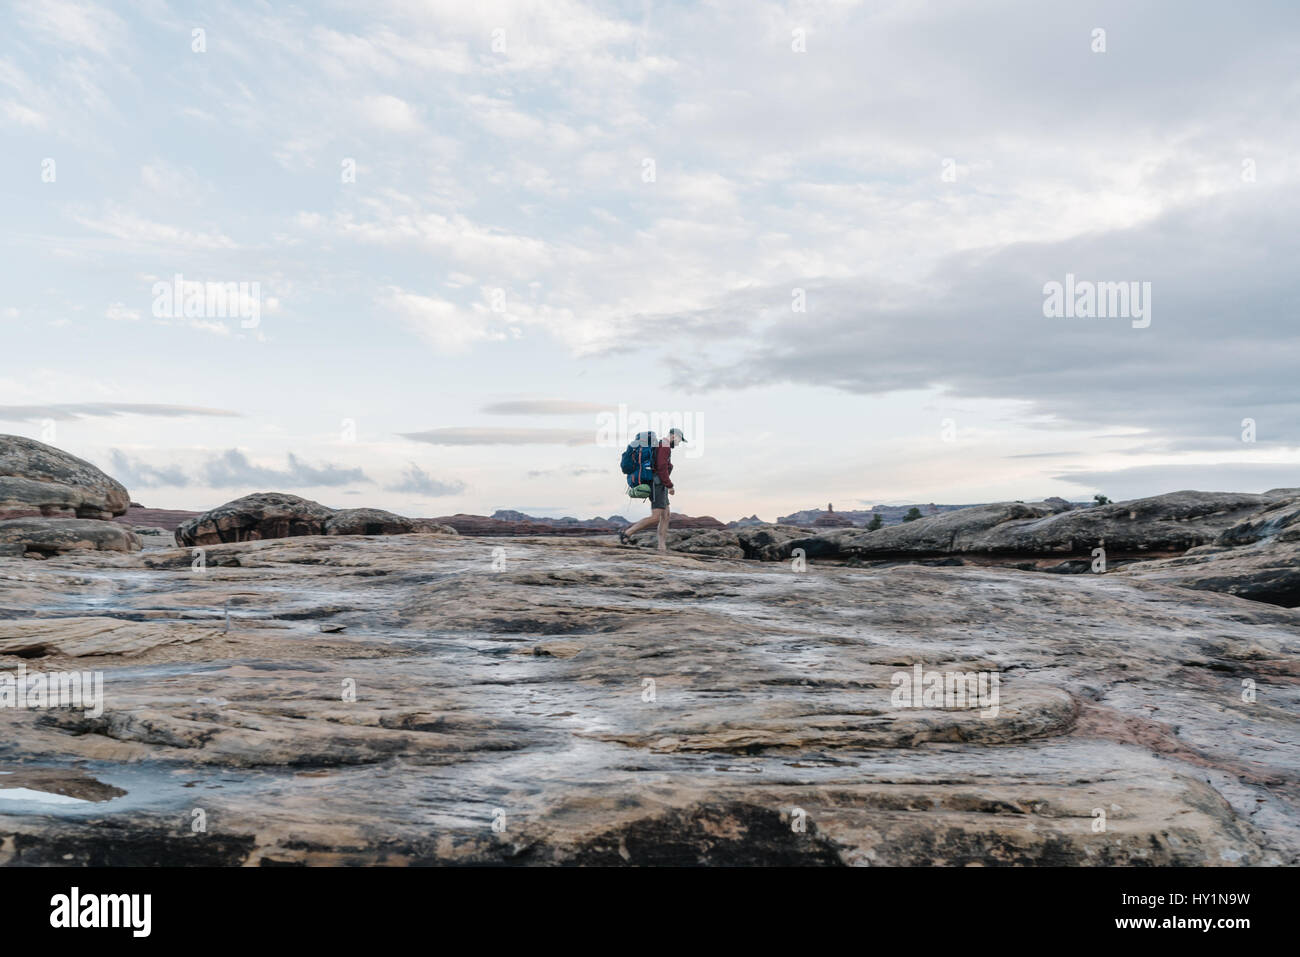 Hiking through the remote Canyonlands in Utah. Stock Photo